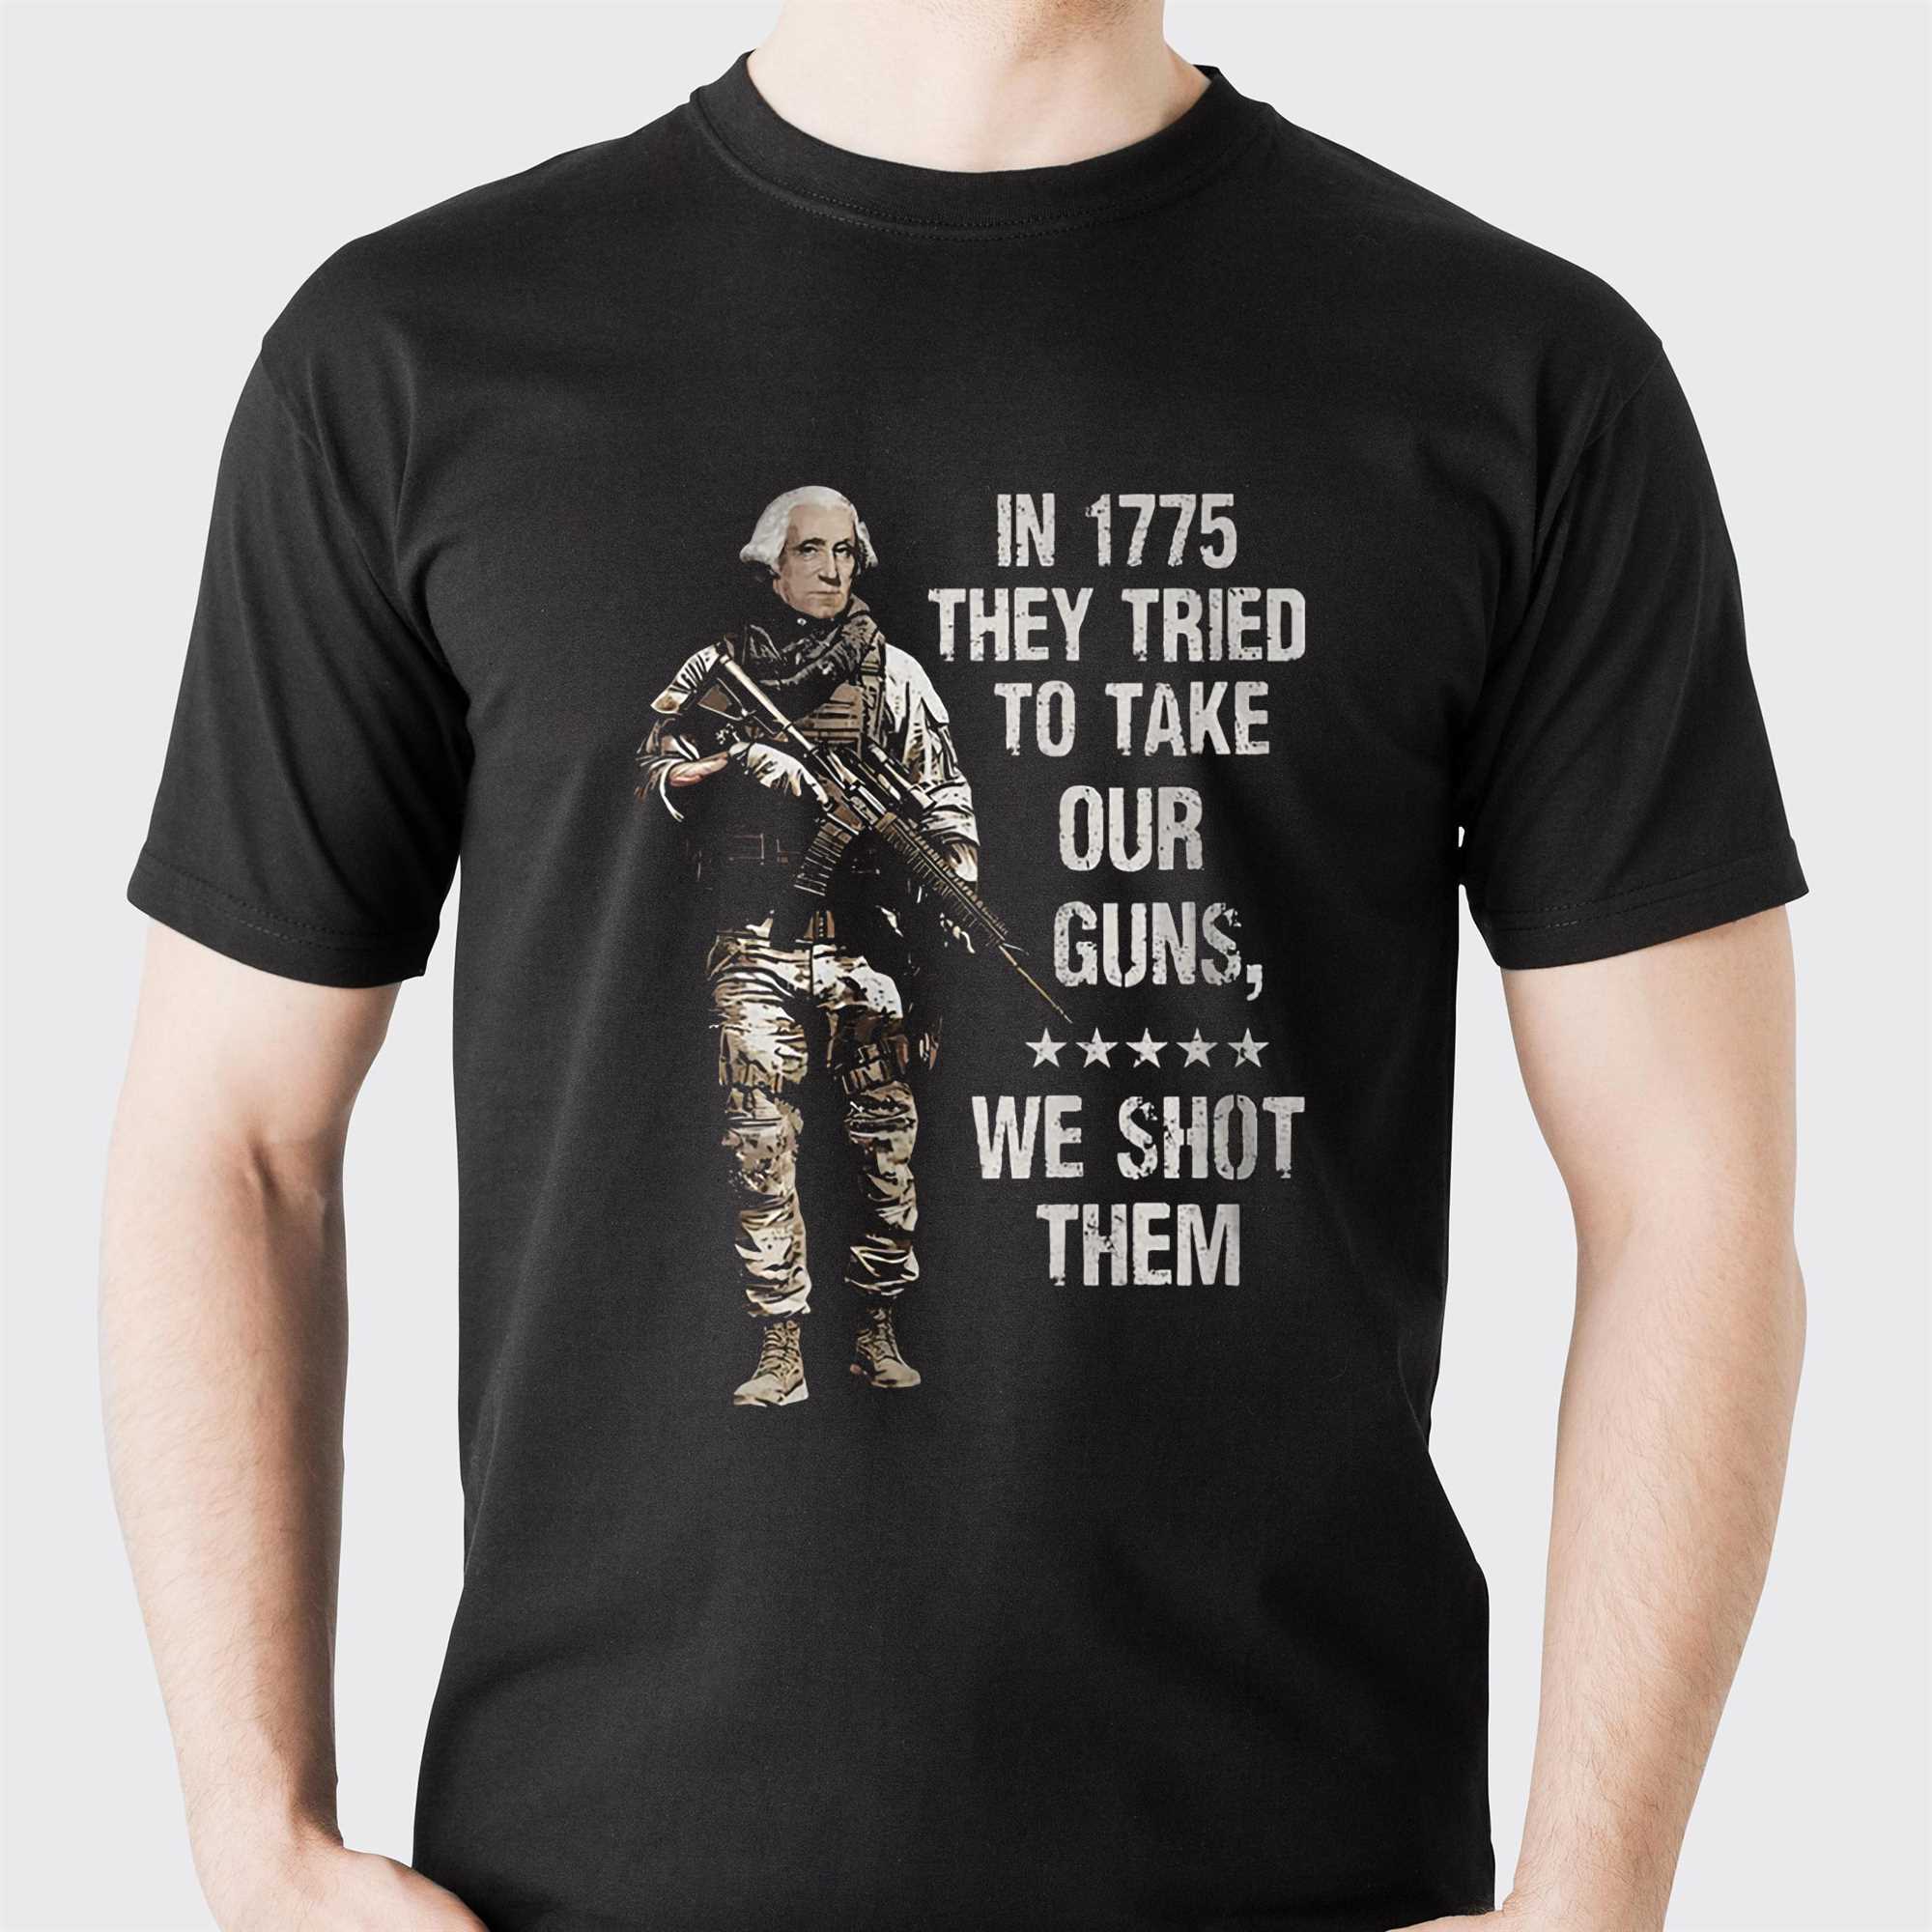 In 1775 They Tried To Take Our Guns We Shot Them Shirt - Shibtee Clothing